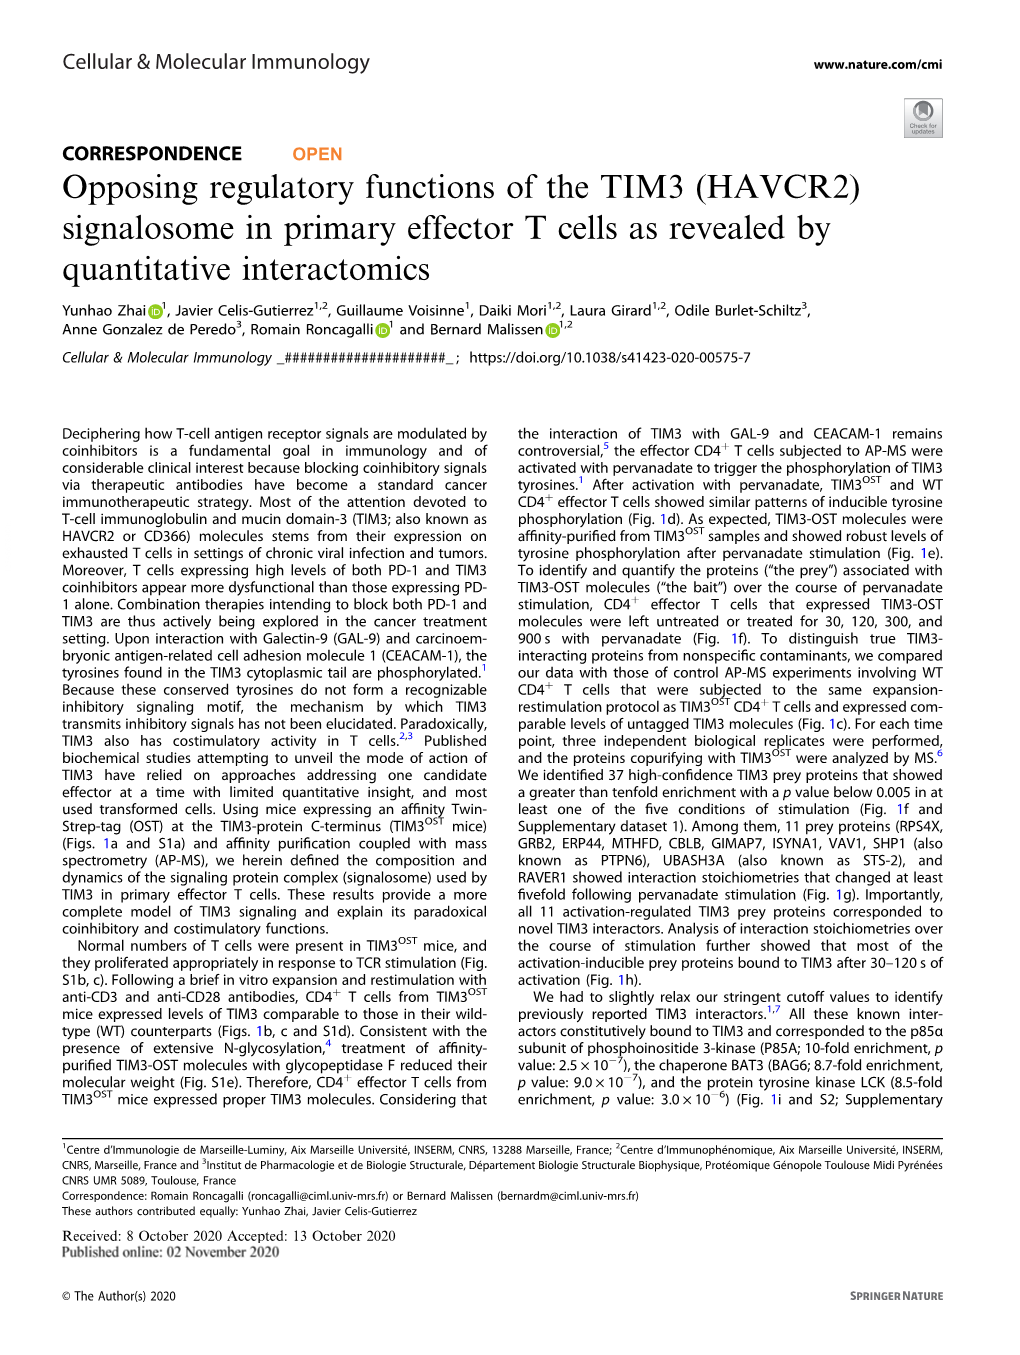 Opposing Regulatory Functions of the TIM3 (HAVCR2) Signalosome in Primary Effector T Cells As Revealed by Quantitative Interactomics